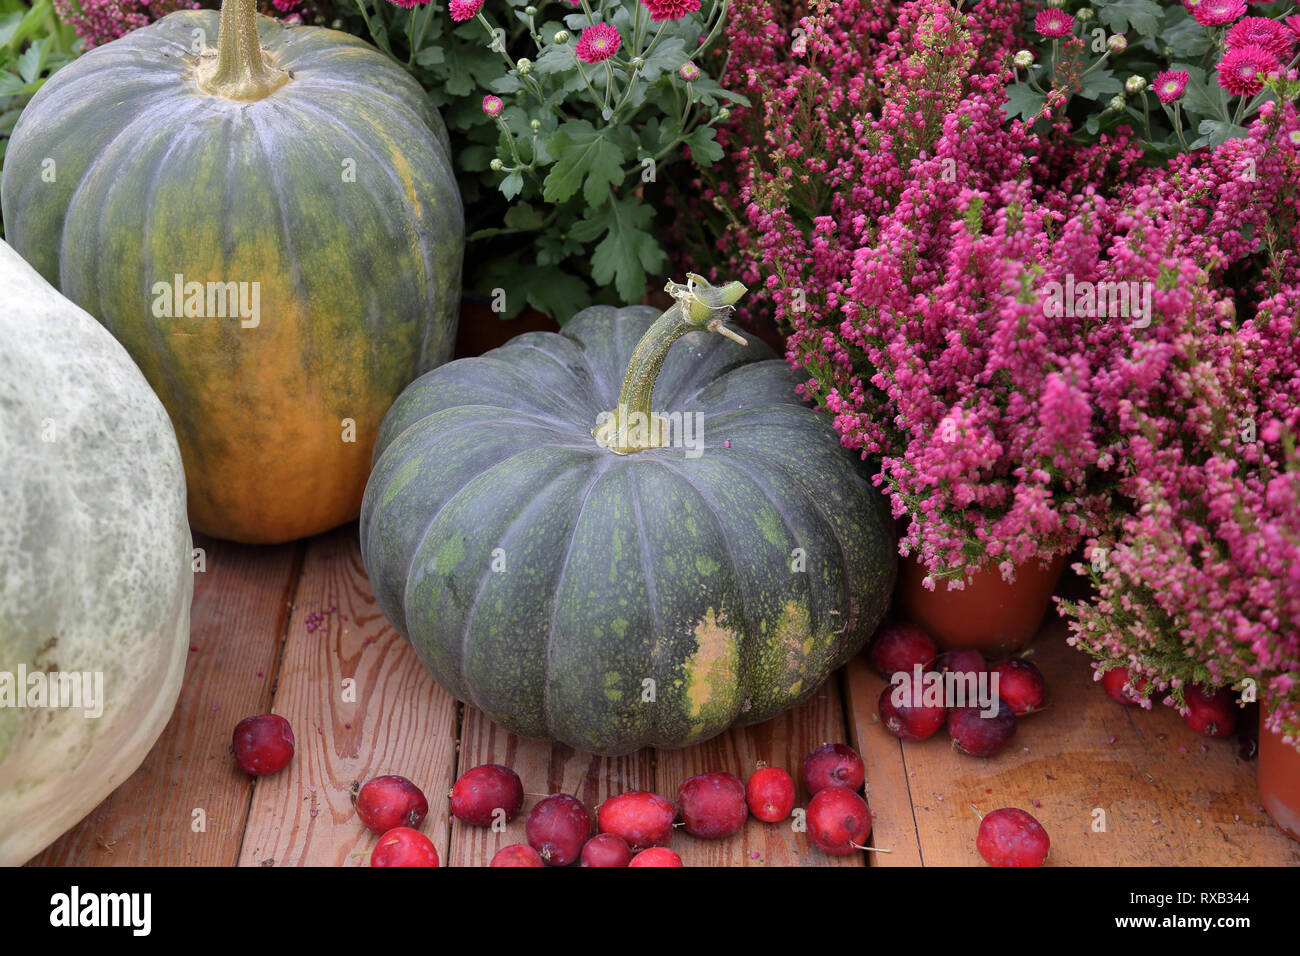 High angle view of pumpkins with flowers on wooden table in backyard Stock Photo